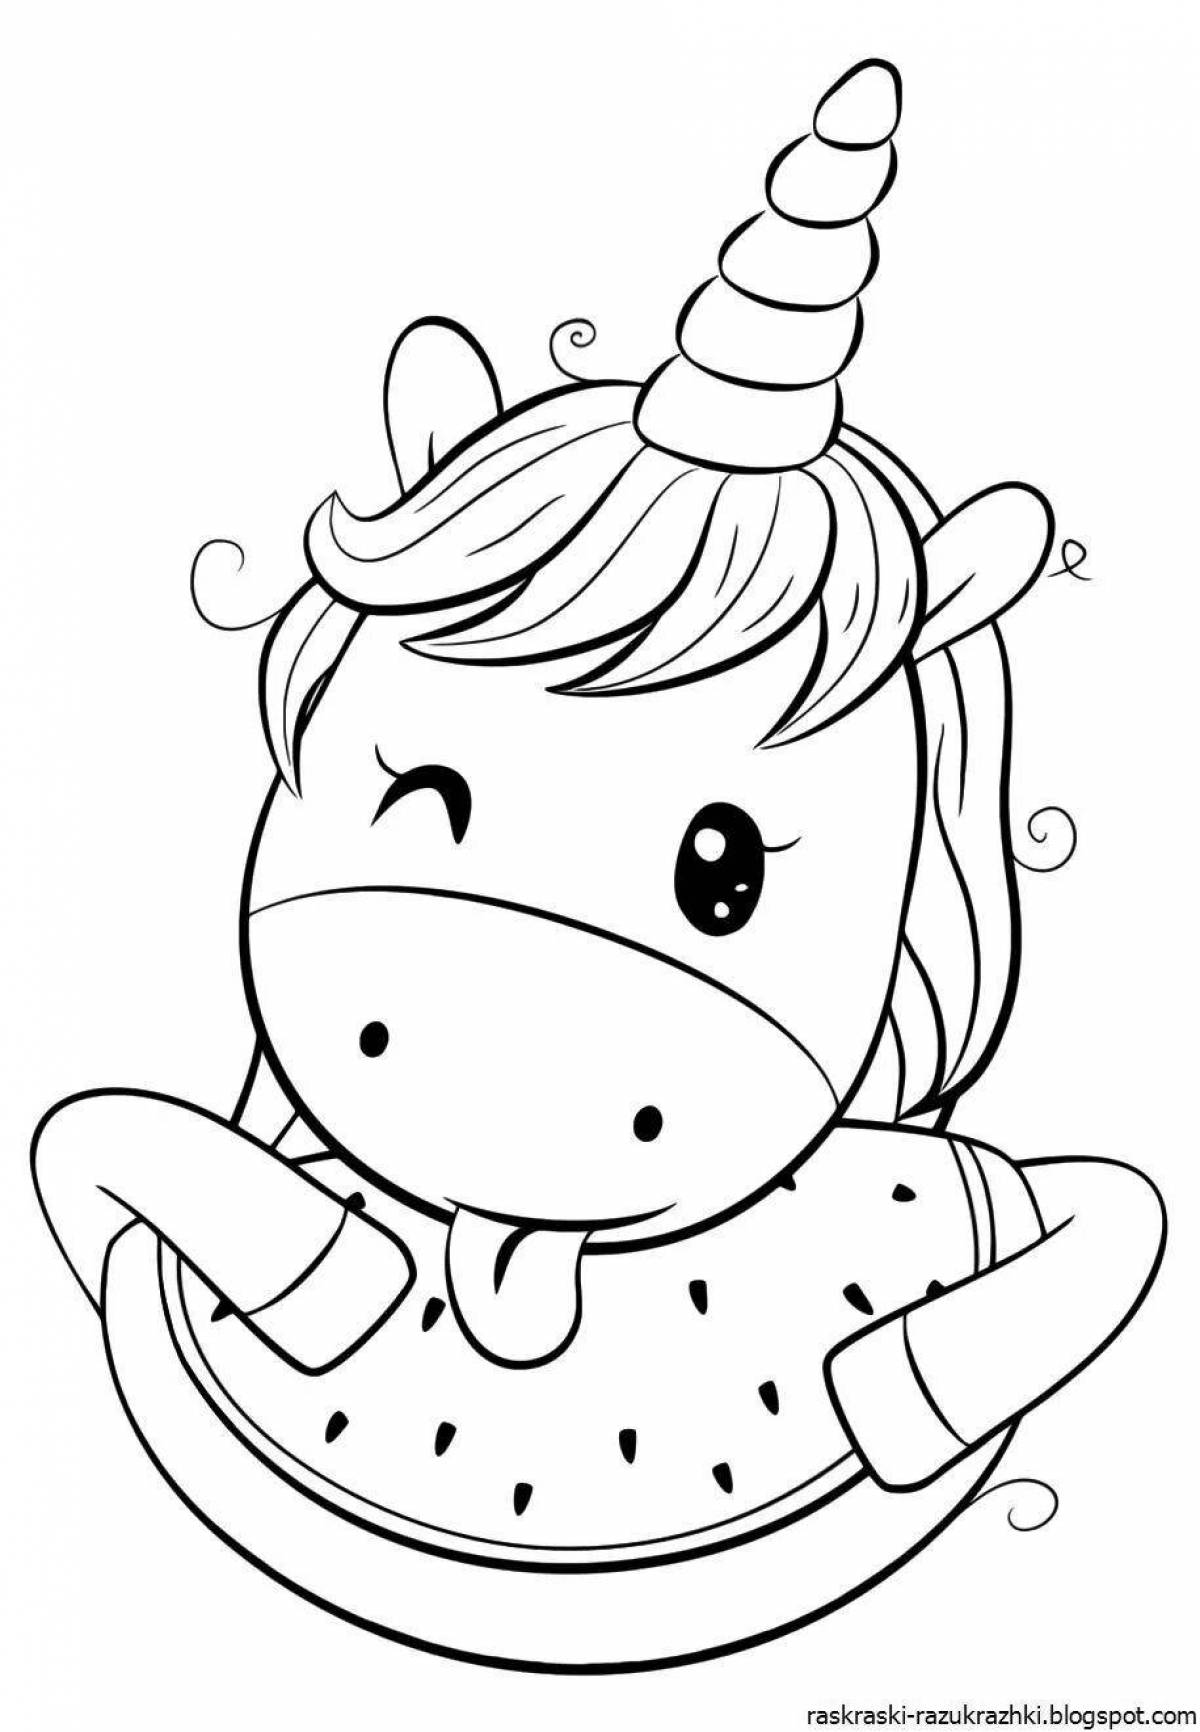 Playful coloring for children 5-6 years old for girls unicorns